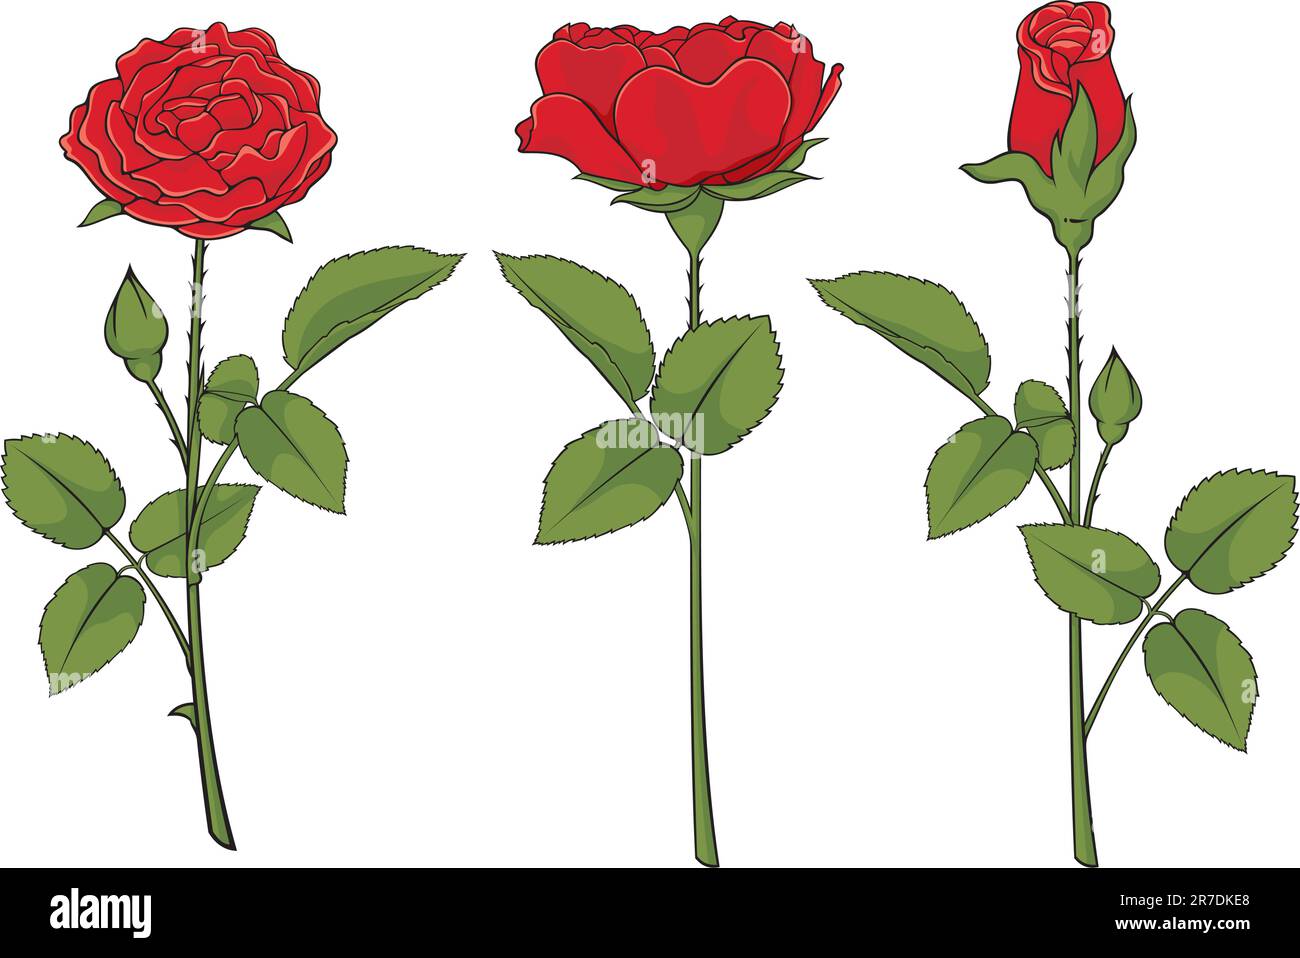 Illustration of three red roses isolated on white background. Stock Vector